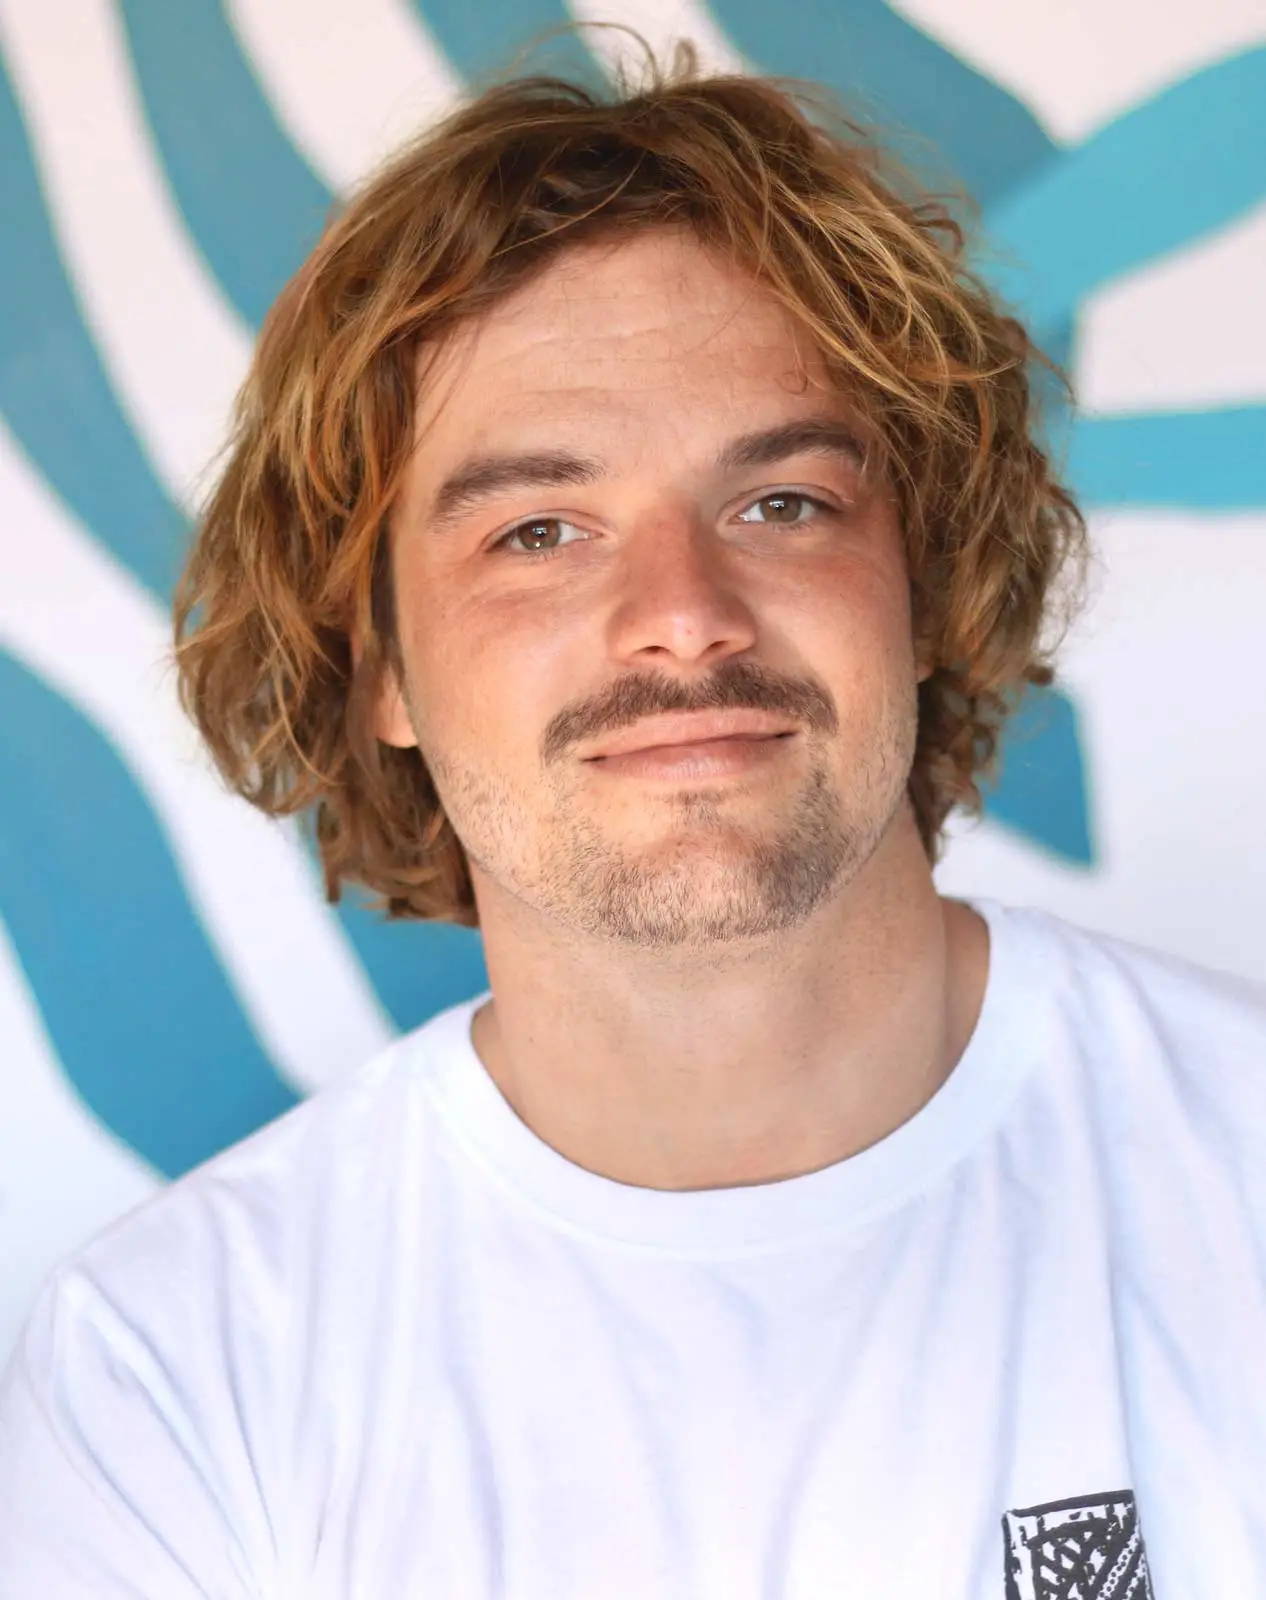 Thilo von Osterhausen, Founder and Product Development of KANOA Surfboards